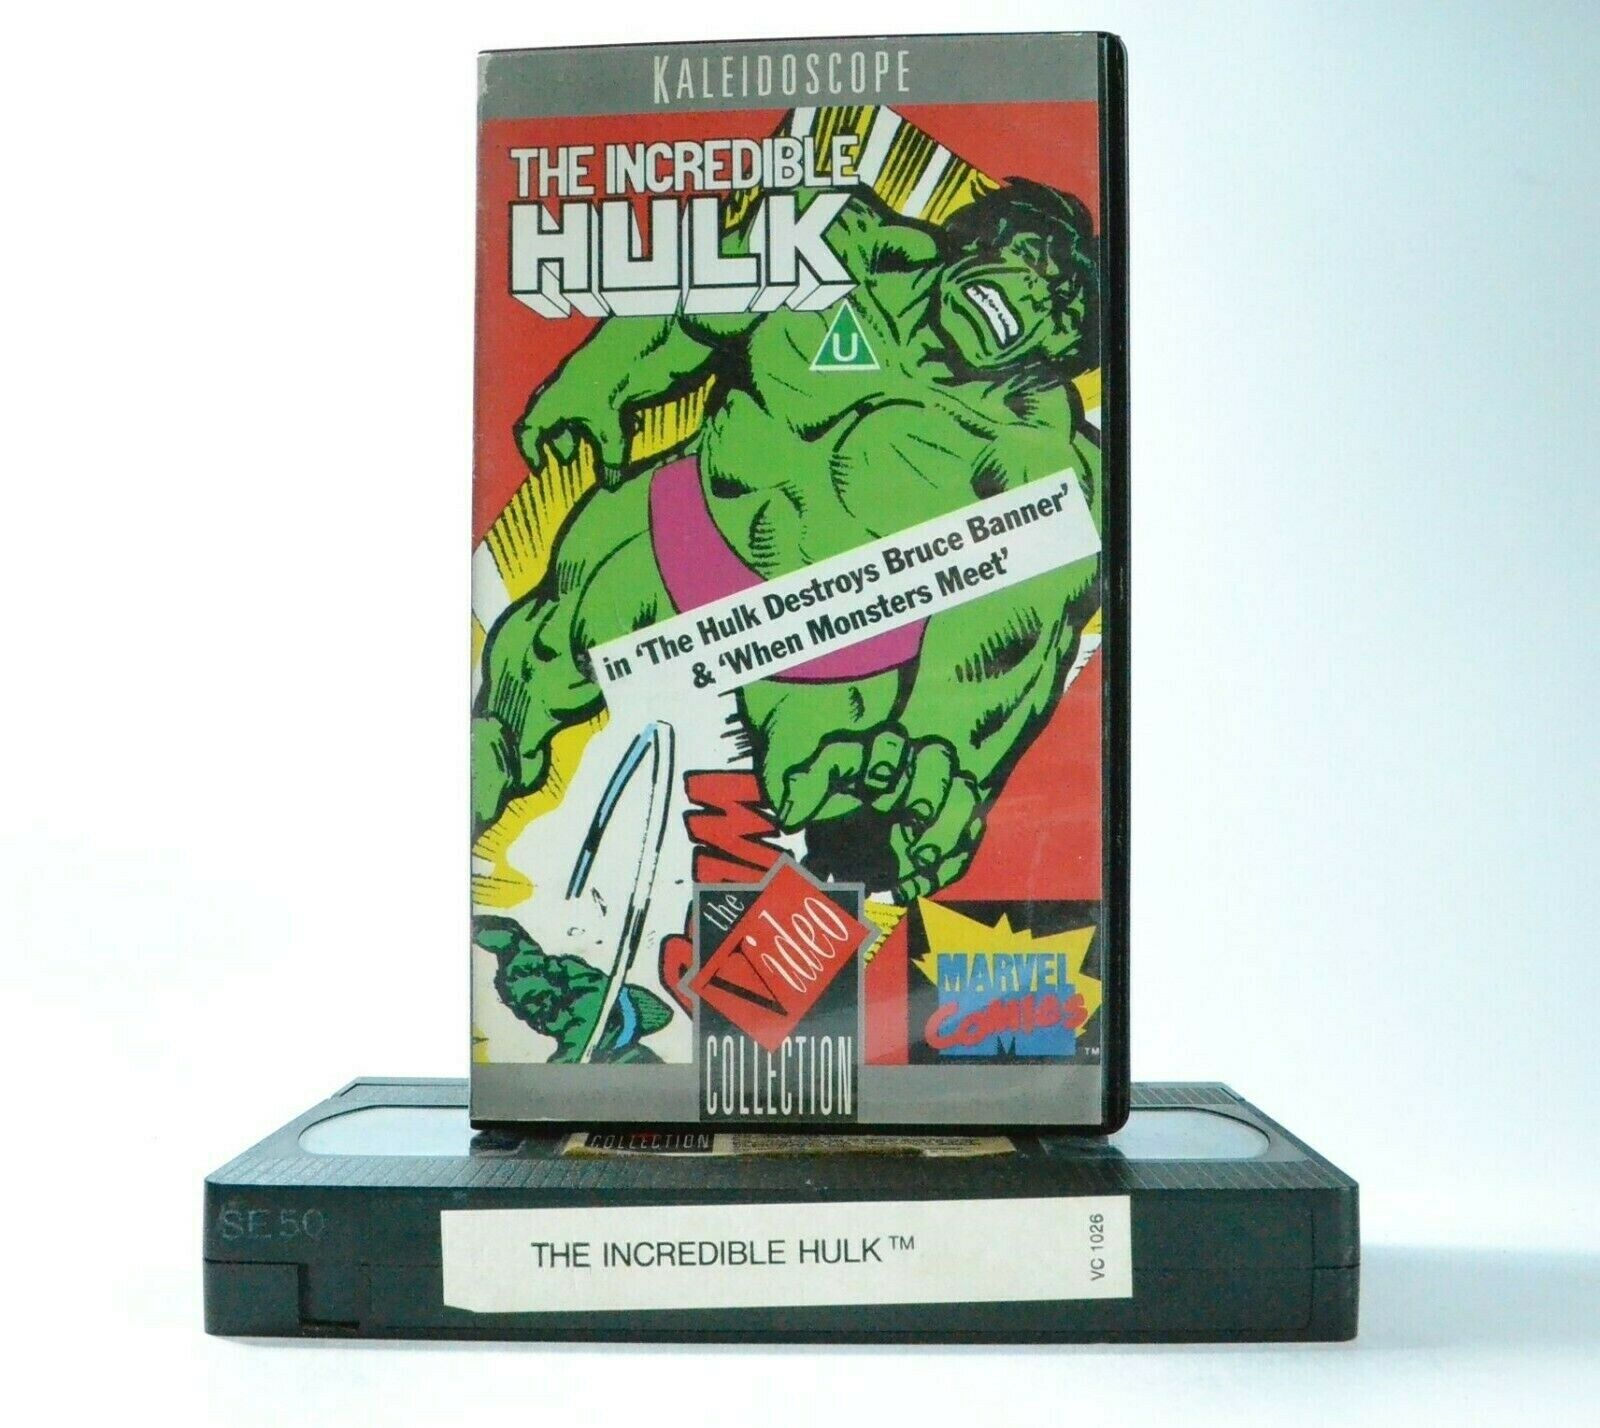 The Incredible Hulk: When Monsters Meet - Animation - Marvel Comics Action - VHS-